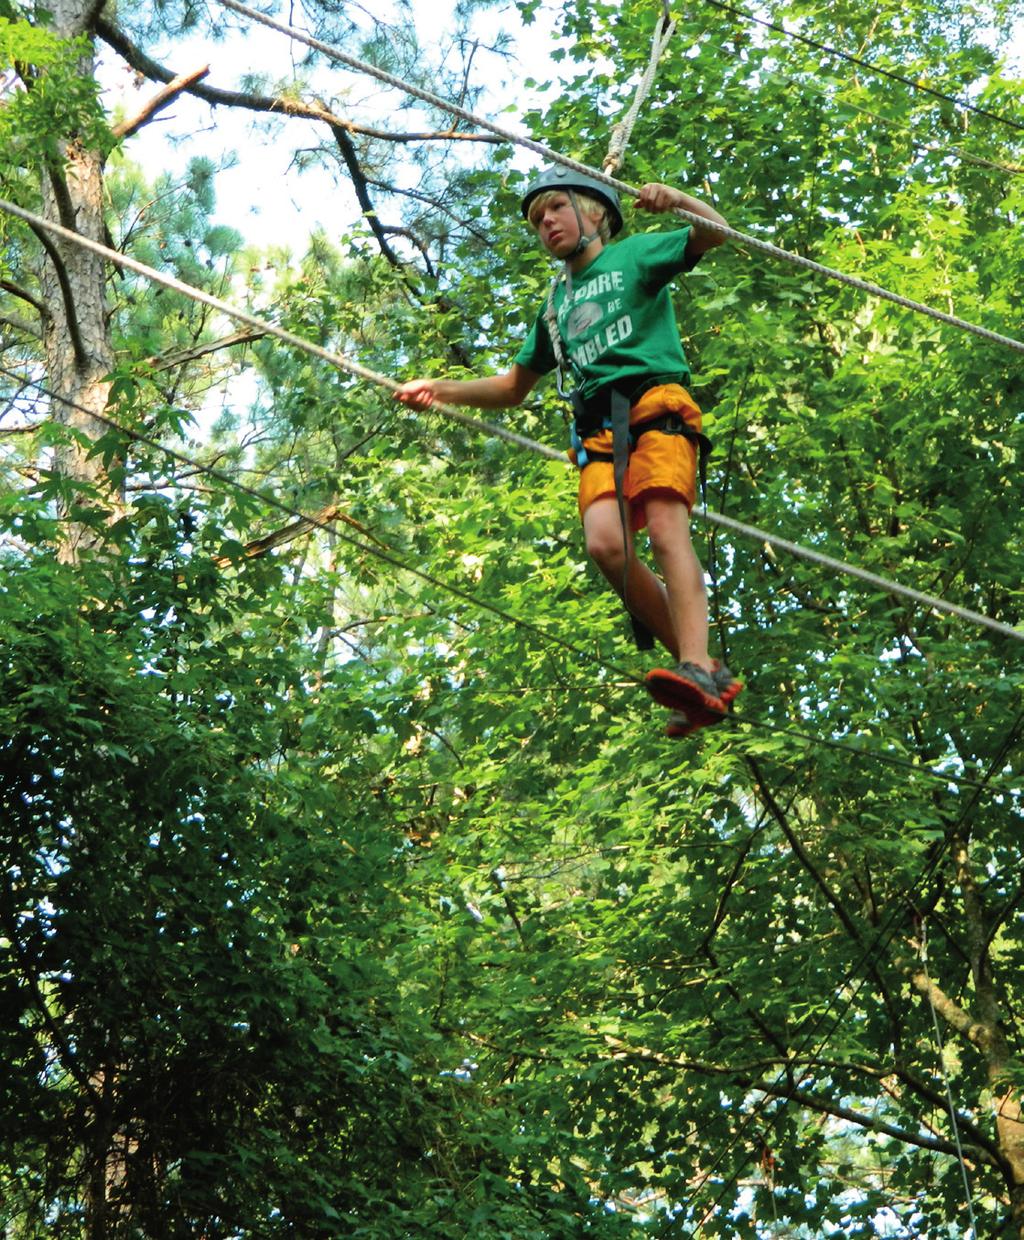 TEAM BUILDING YMCA Camp Chandler can offer your group a variety of team building activities designed to